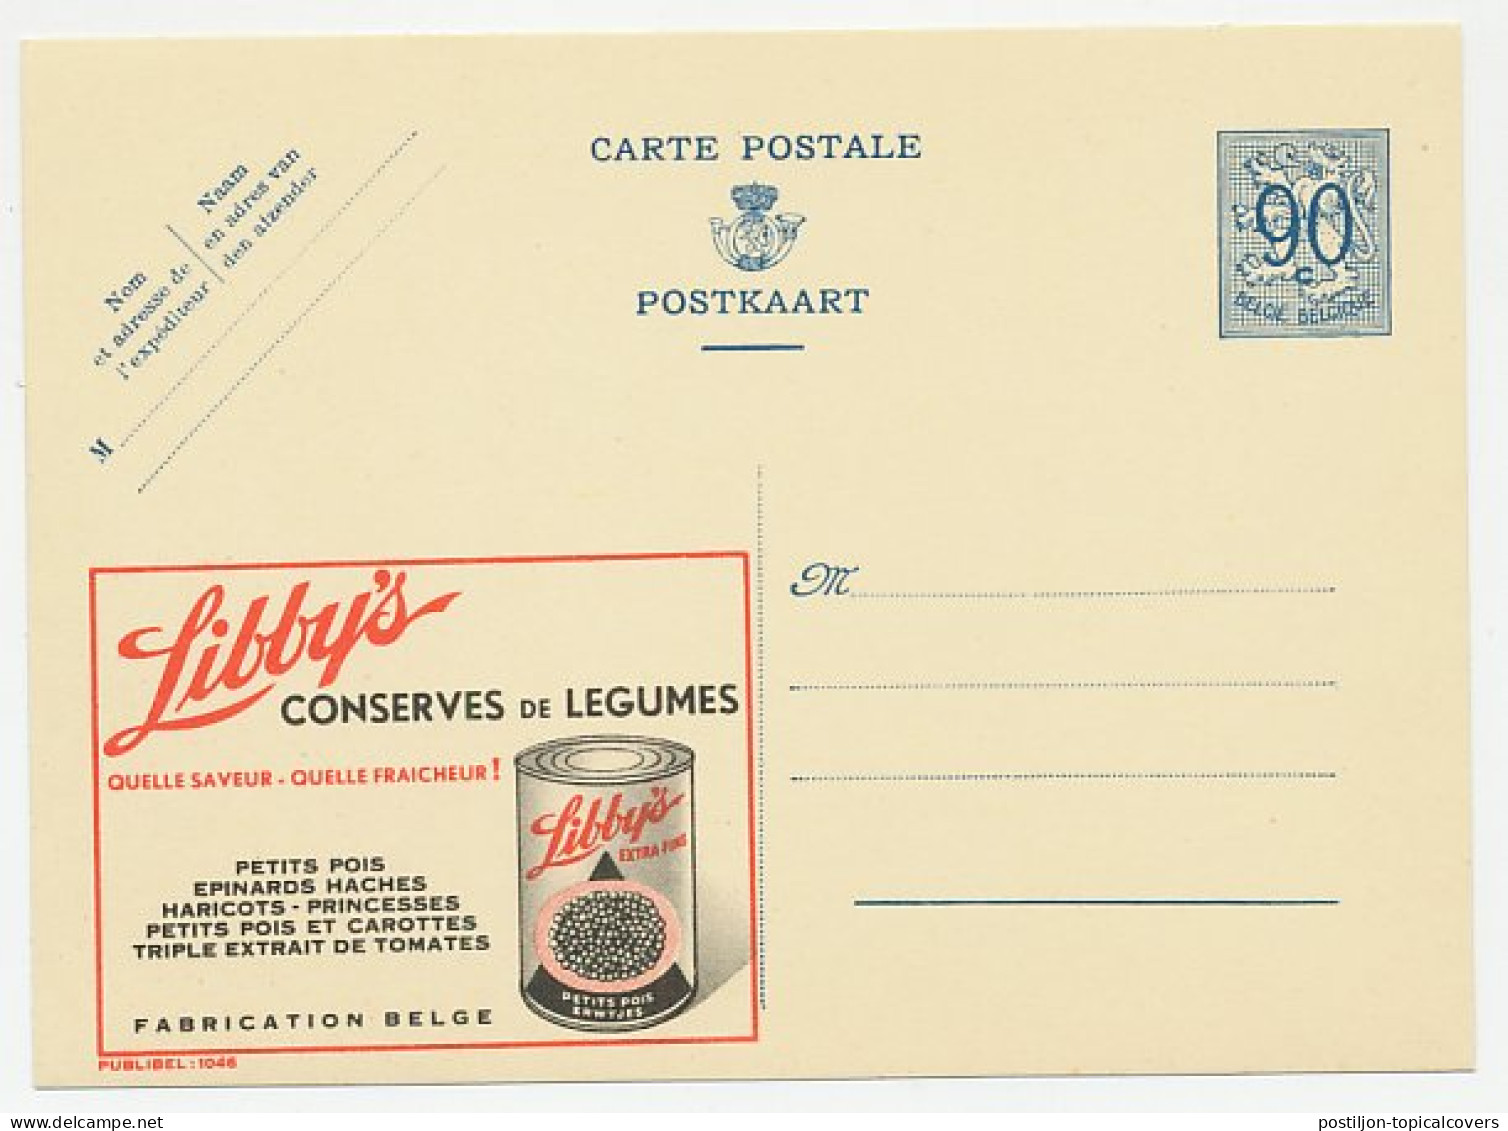 Publibel - Postal Stationery Belgium 1951 Canned Vegetables - Pea - Spinach - Beans - Carrots - Tomatoes - Gemüse